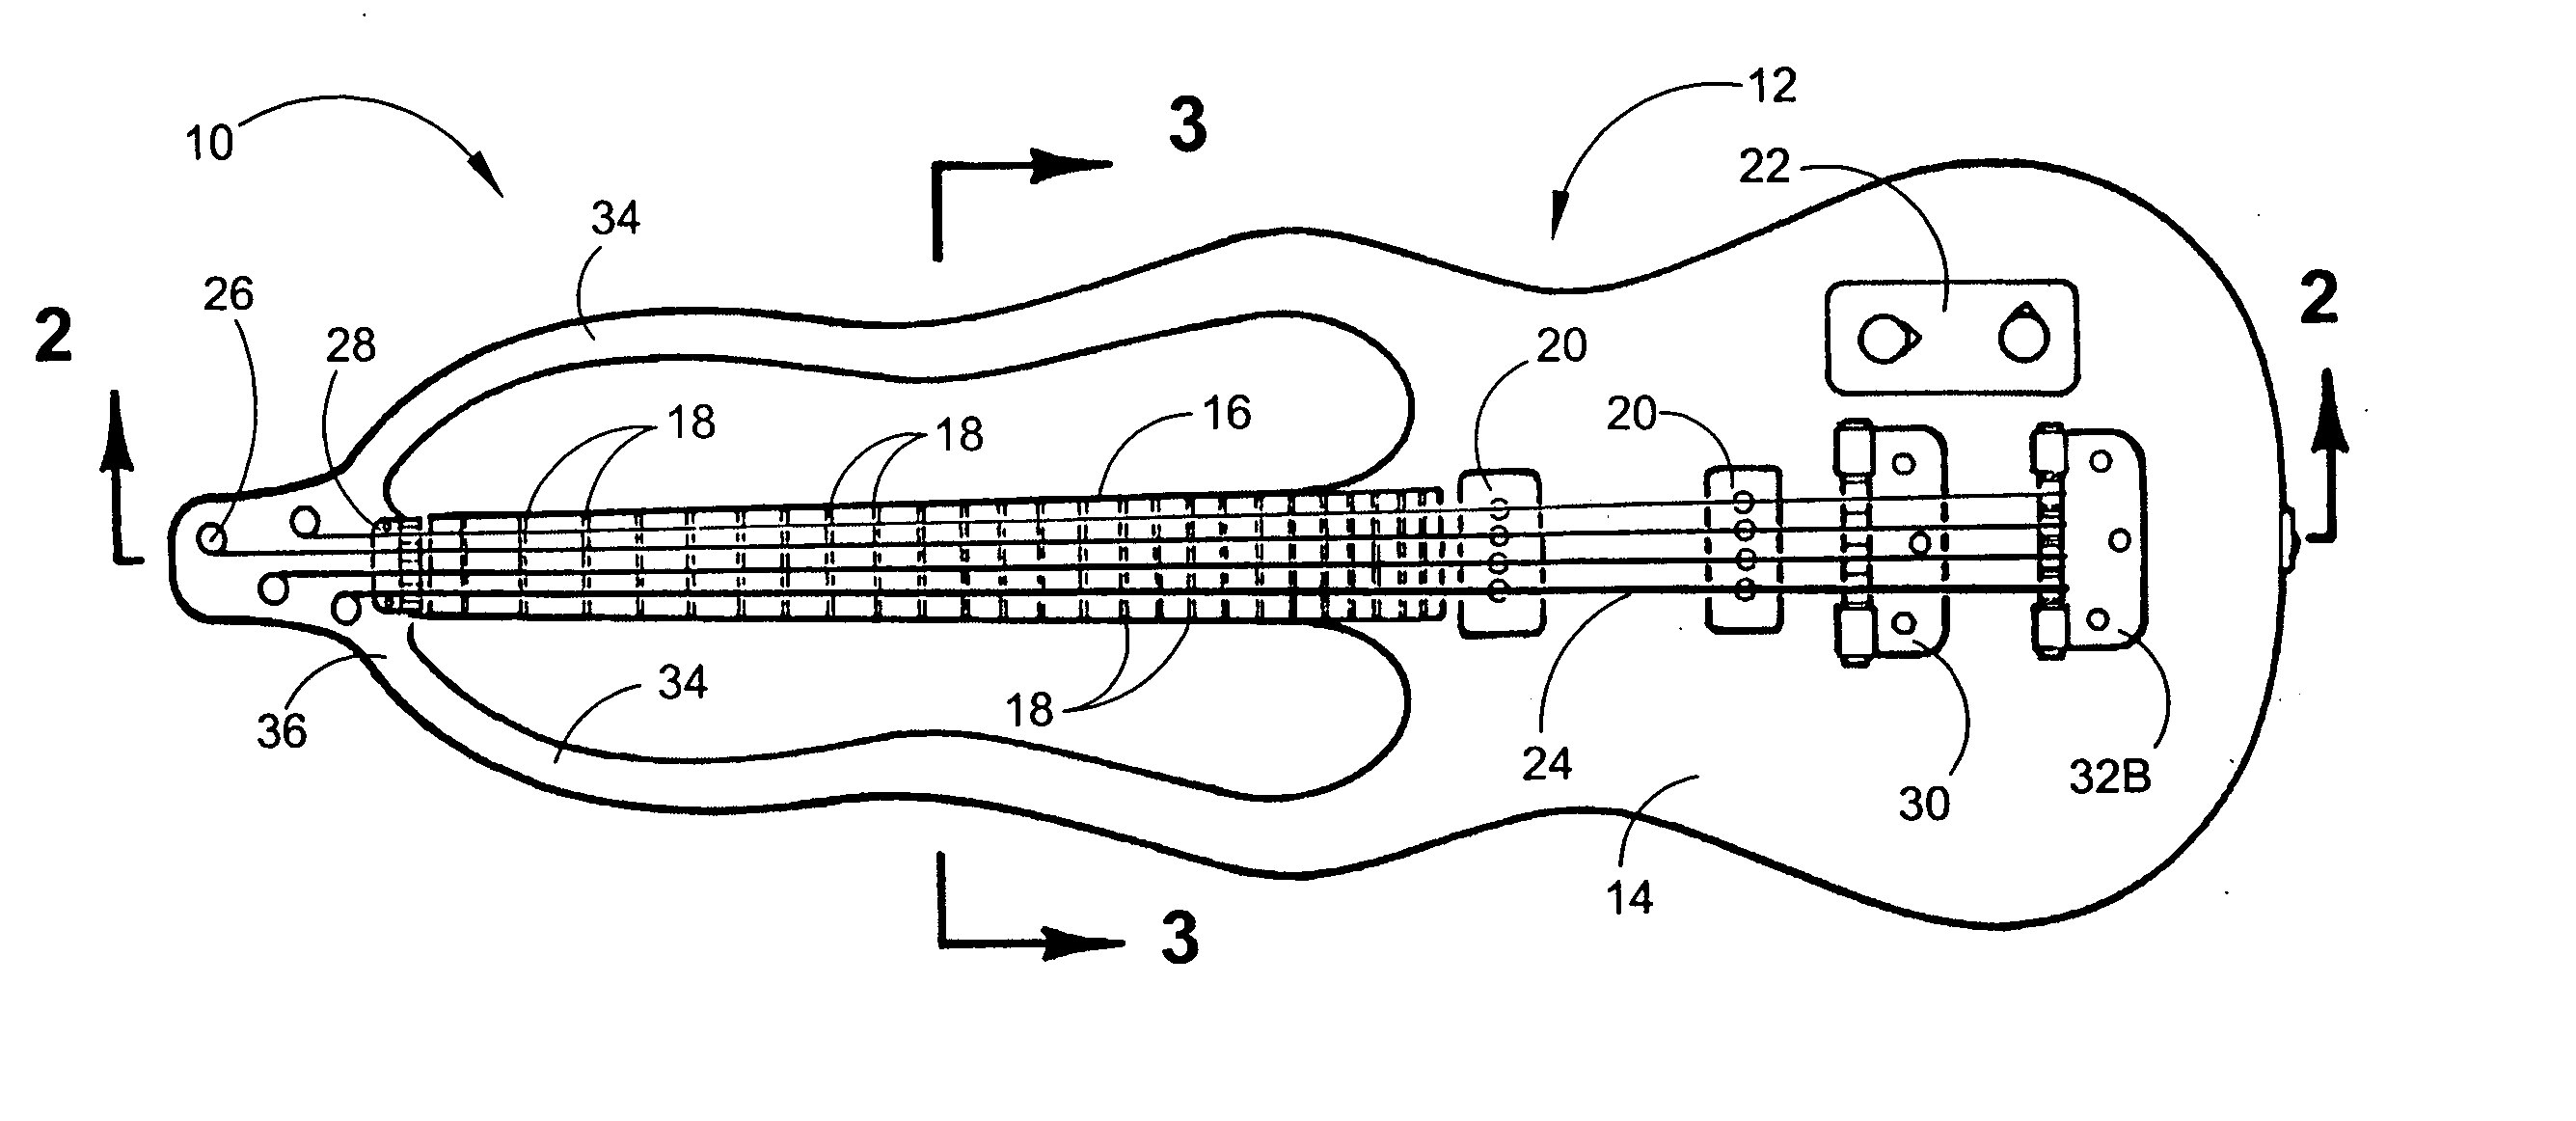 Compound musical instrument string configuration and support system